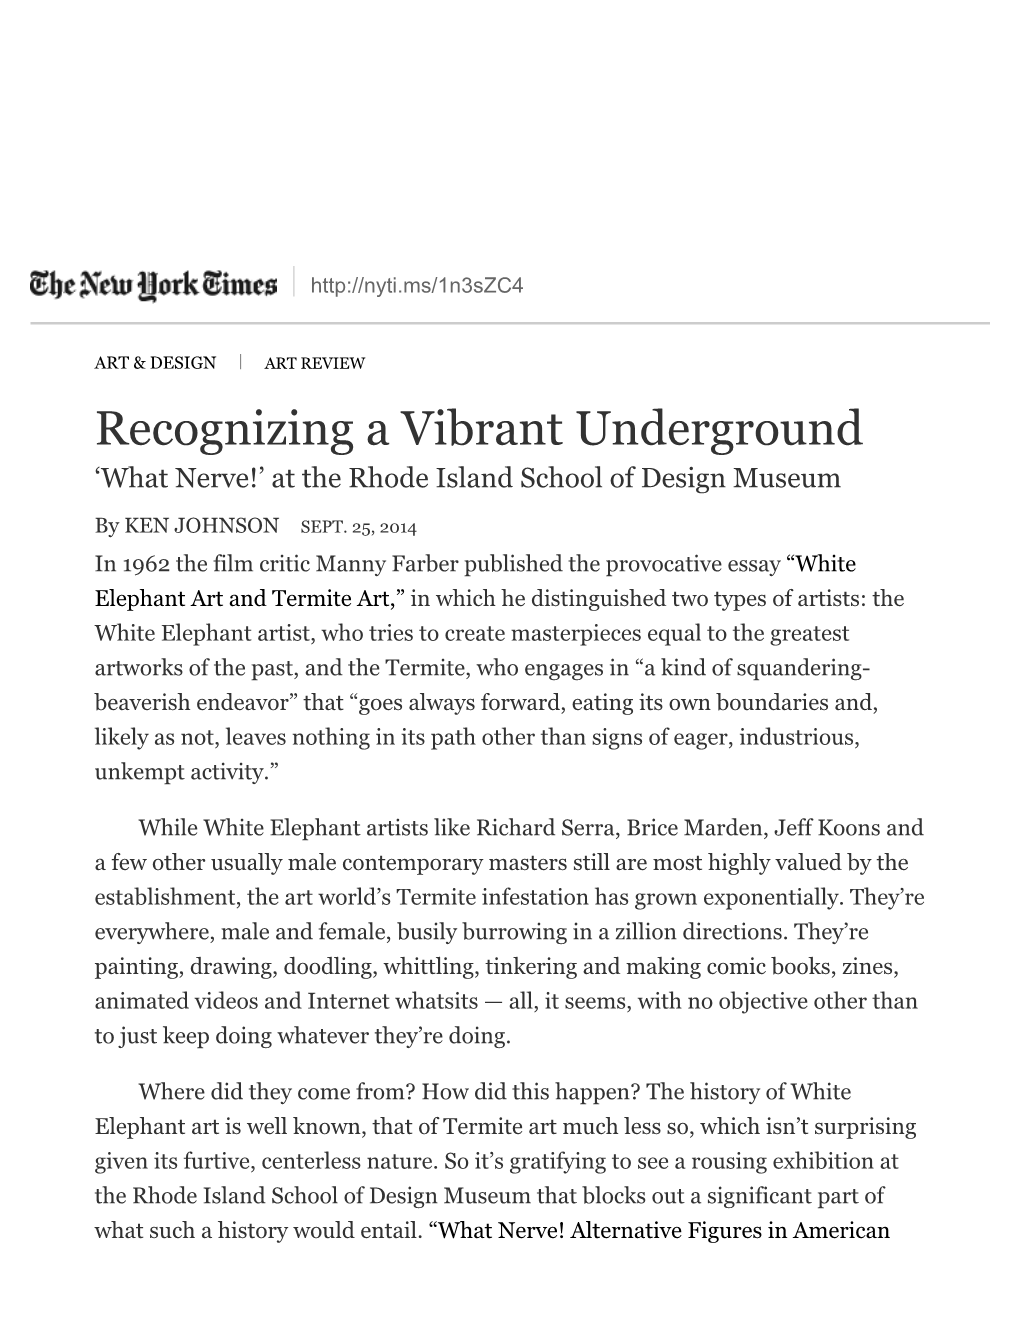 Gladys Nilsson Featured in the New York Times